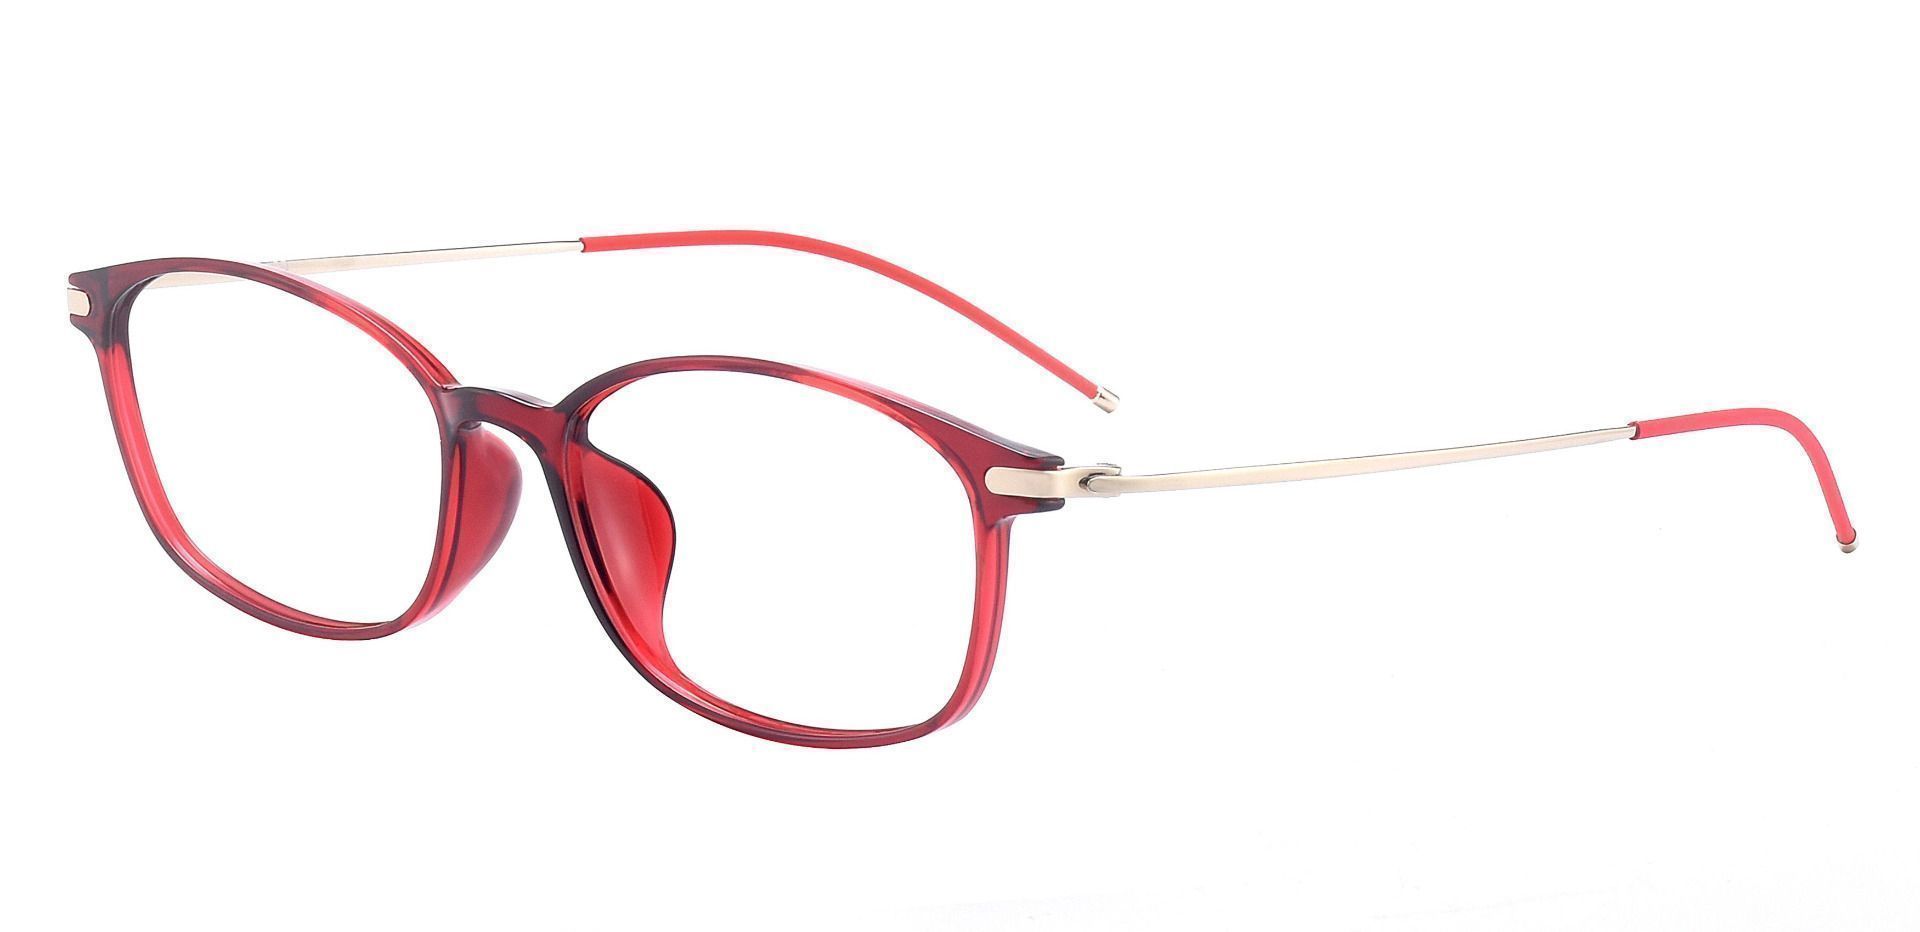 Decker Oval Lined Bifocal Glasses - Red